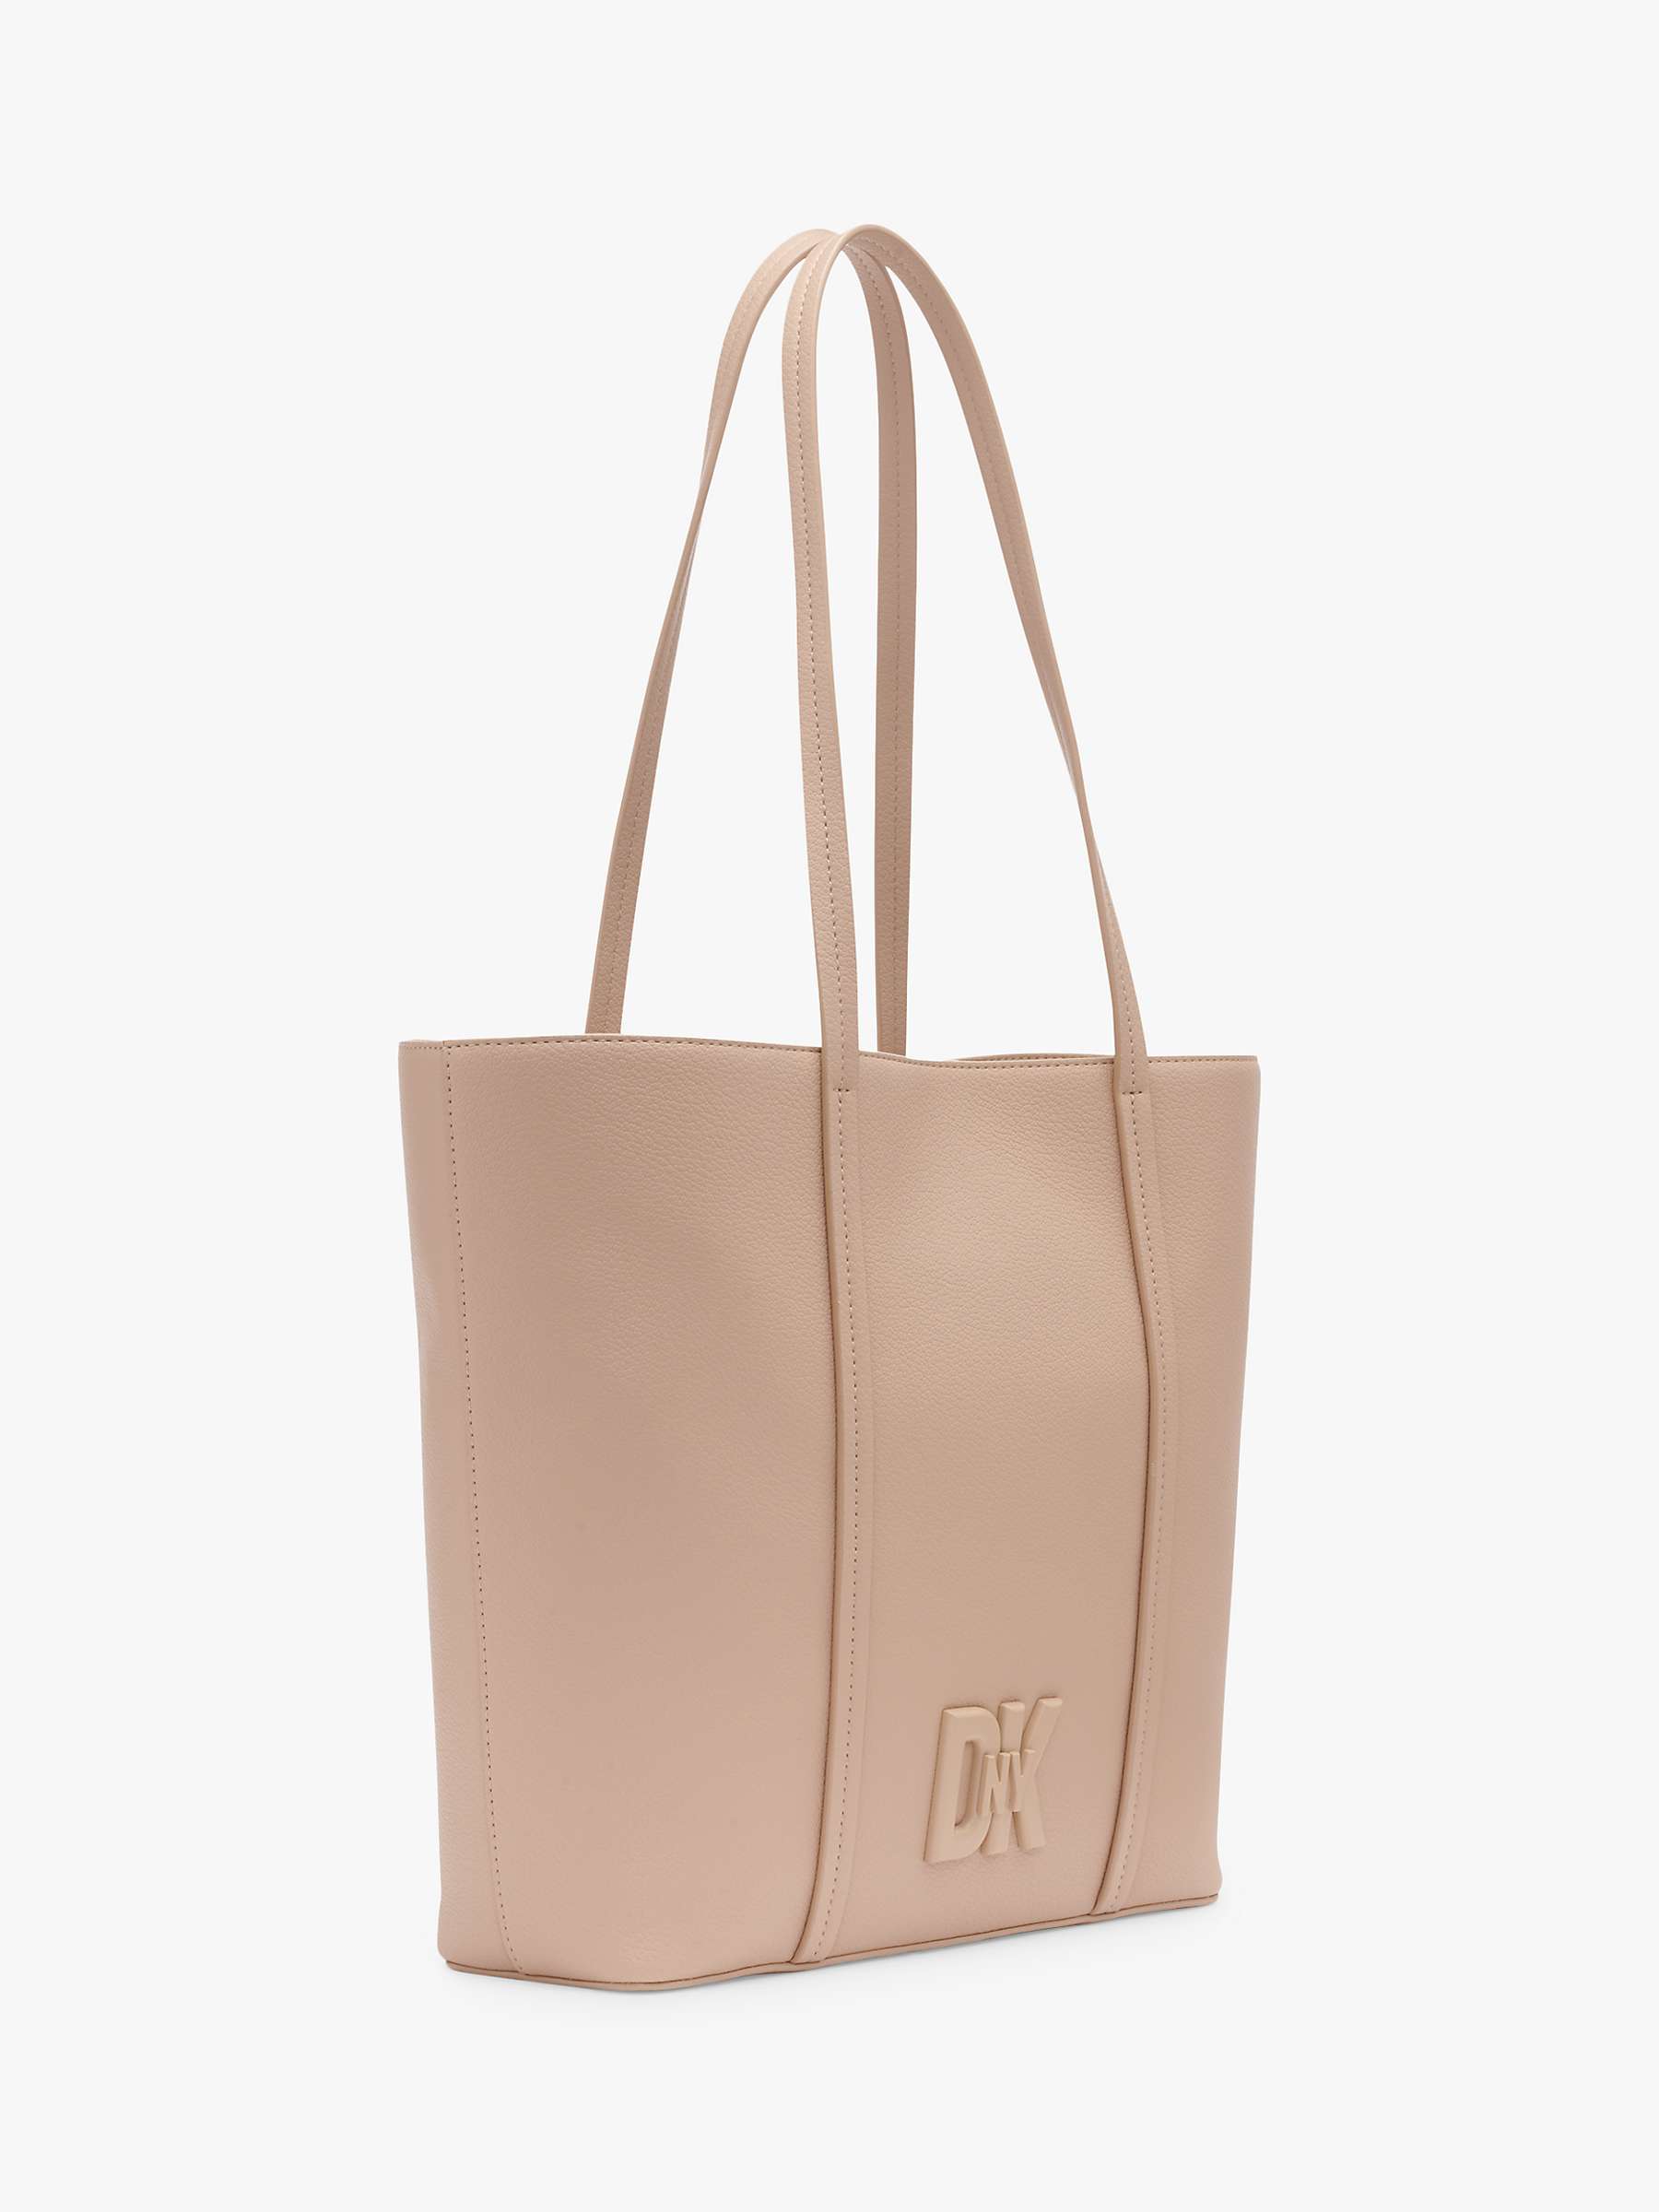 Buy DKNY Seventh Avenue Leather Tote Bag, Neutral Online at johnlewis.com